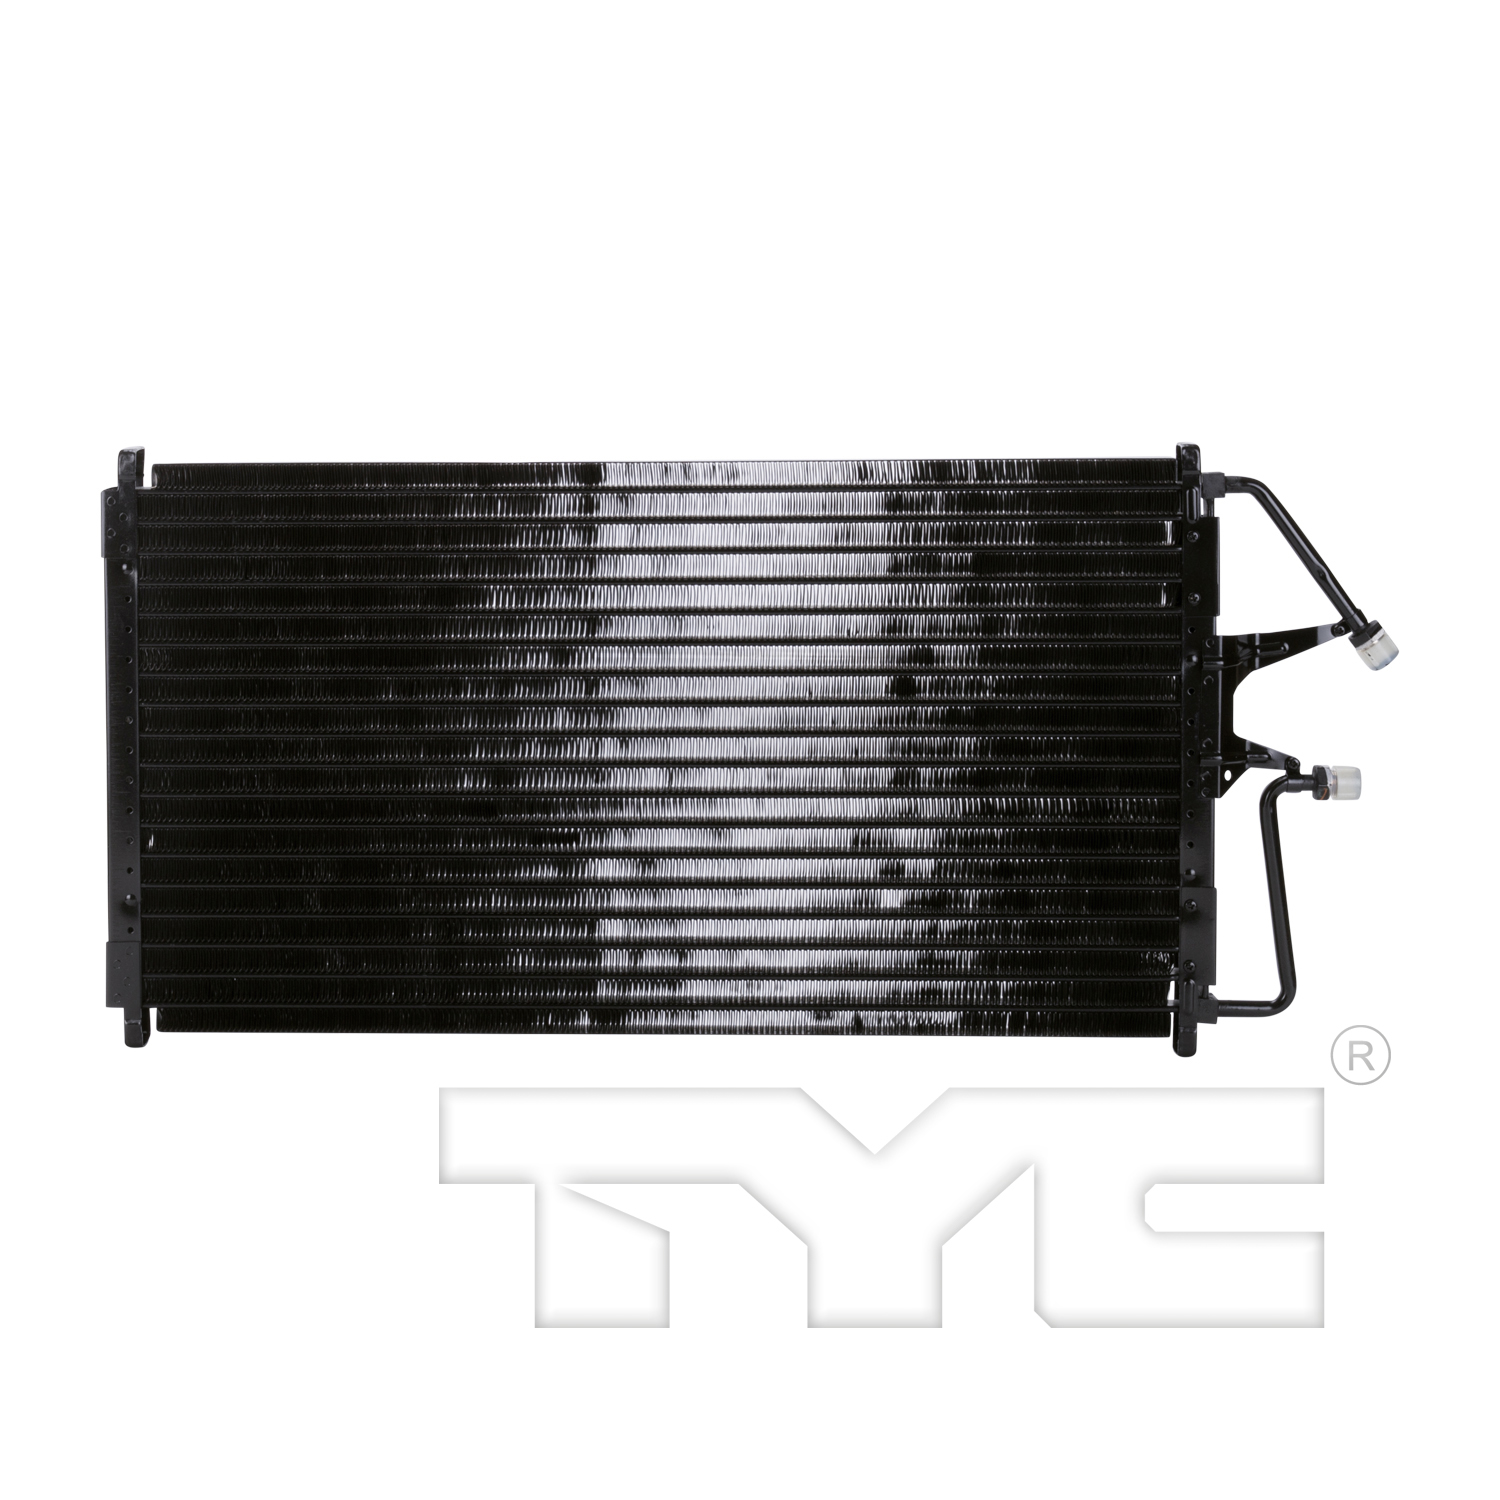 Aftermarket AC CONDENSERS for CHEVROLET - K1500 SUBURBAN, K1500 SUBURBAN,96-99,Air conditioning condenser